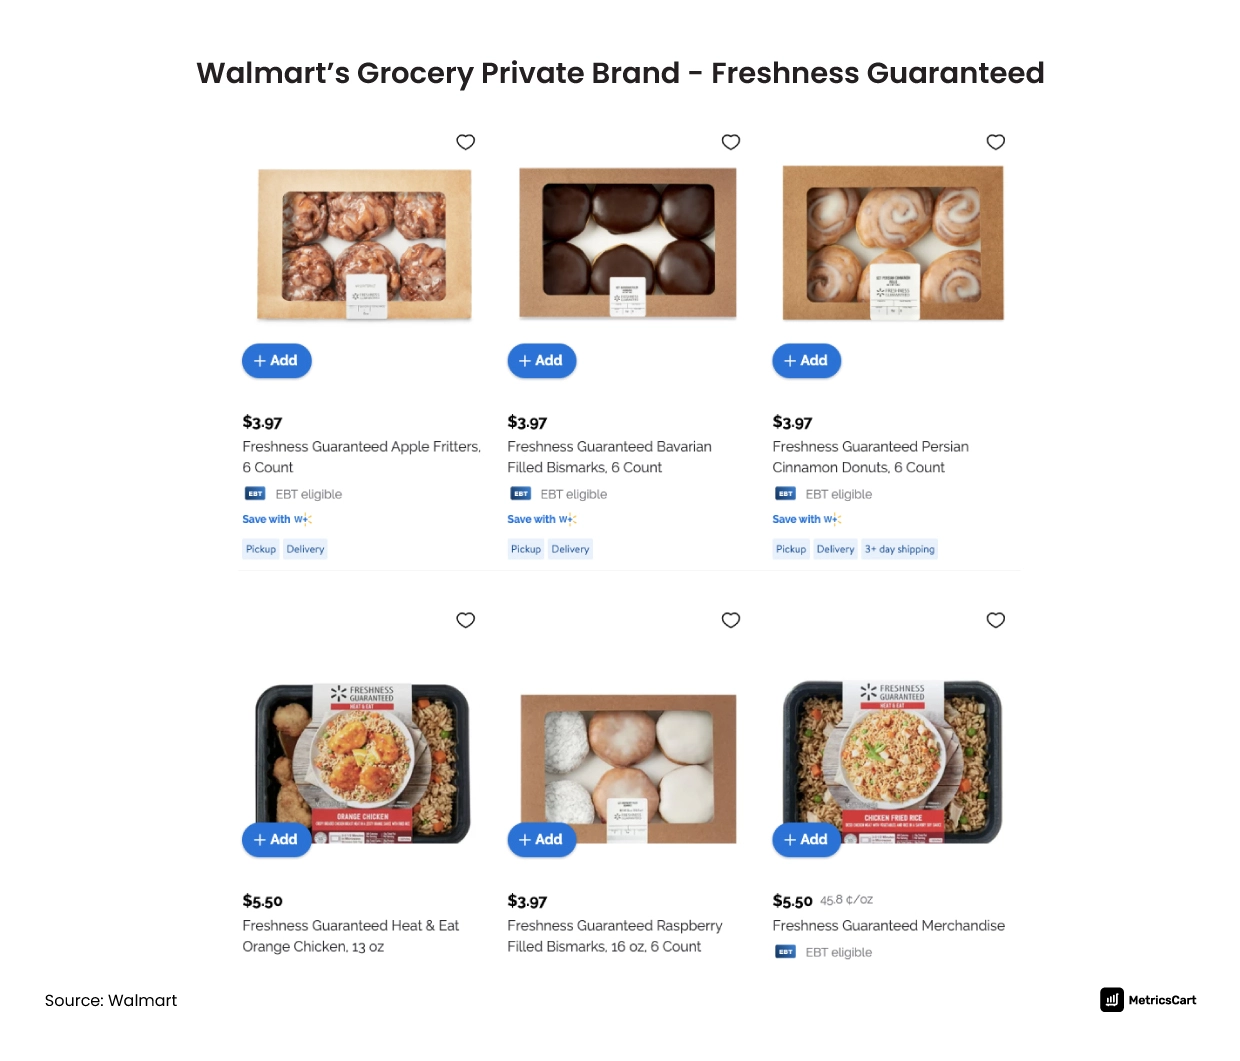 Walmart’s Grocery Private Label Brand - Freshness Guaranteed